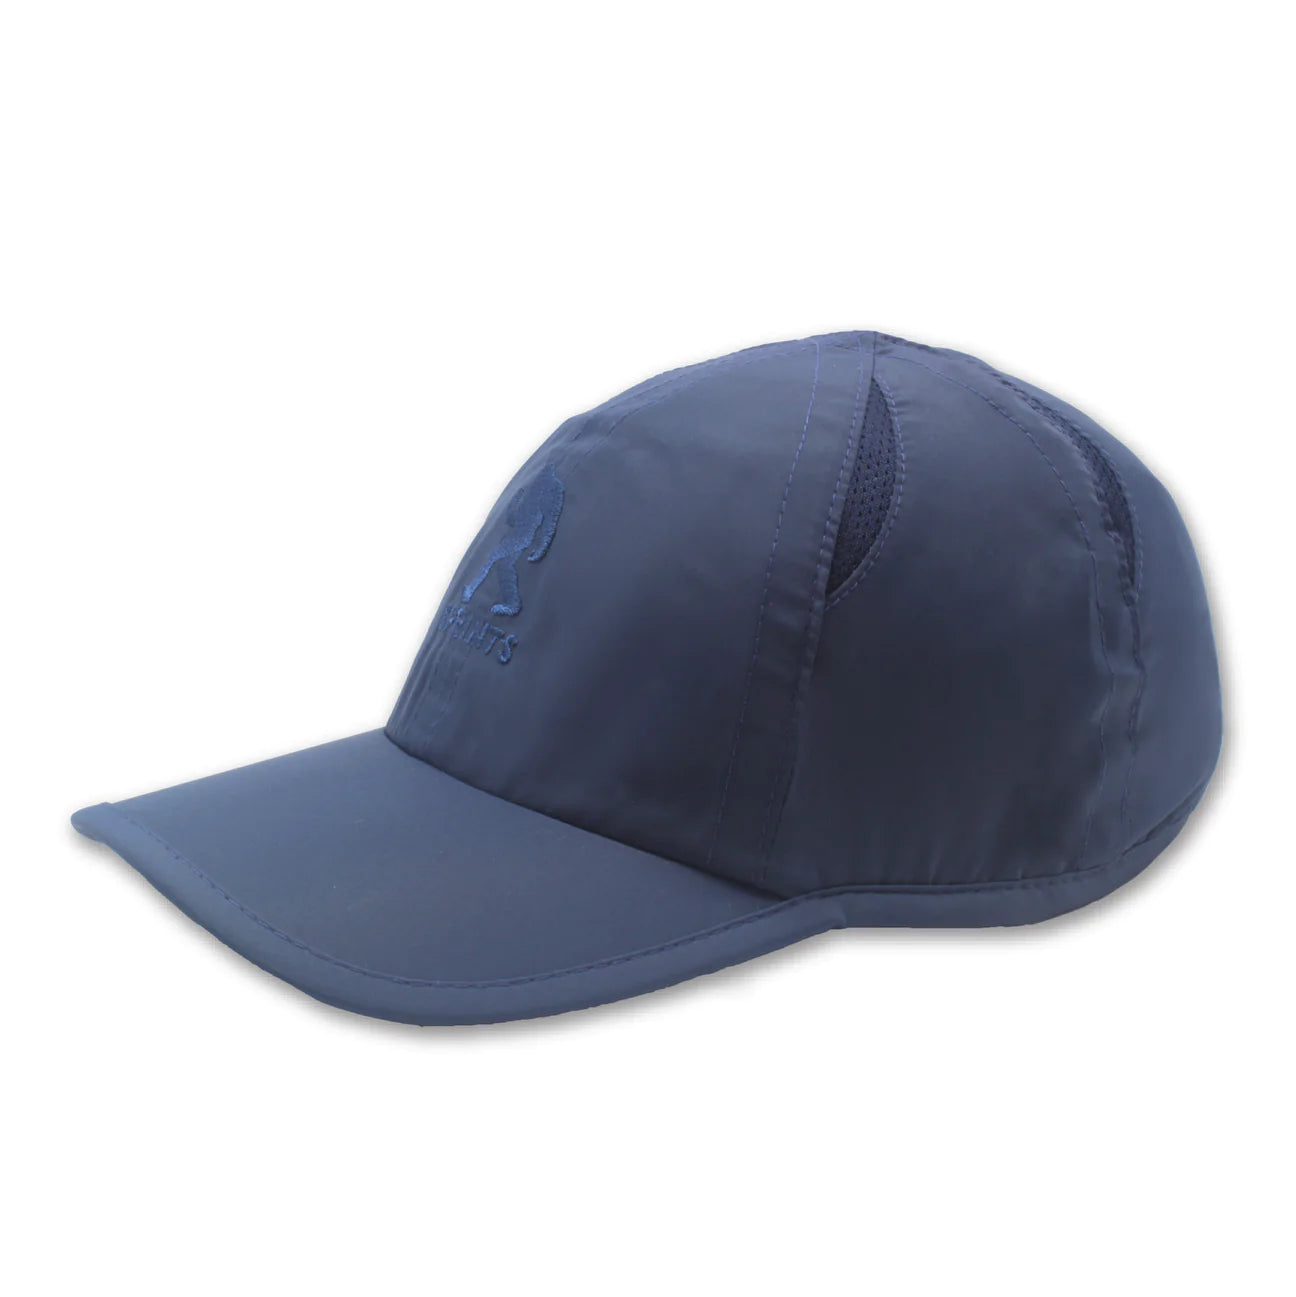 Sprints Out & Back Running Hat - SPRN-OUTBACK